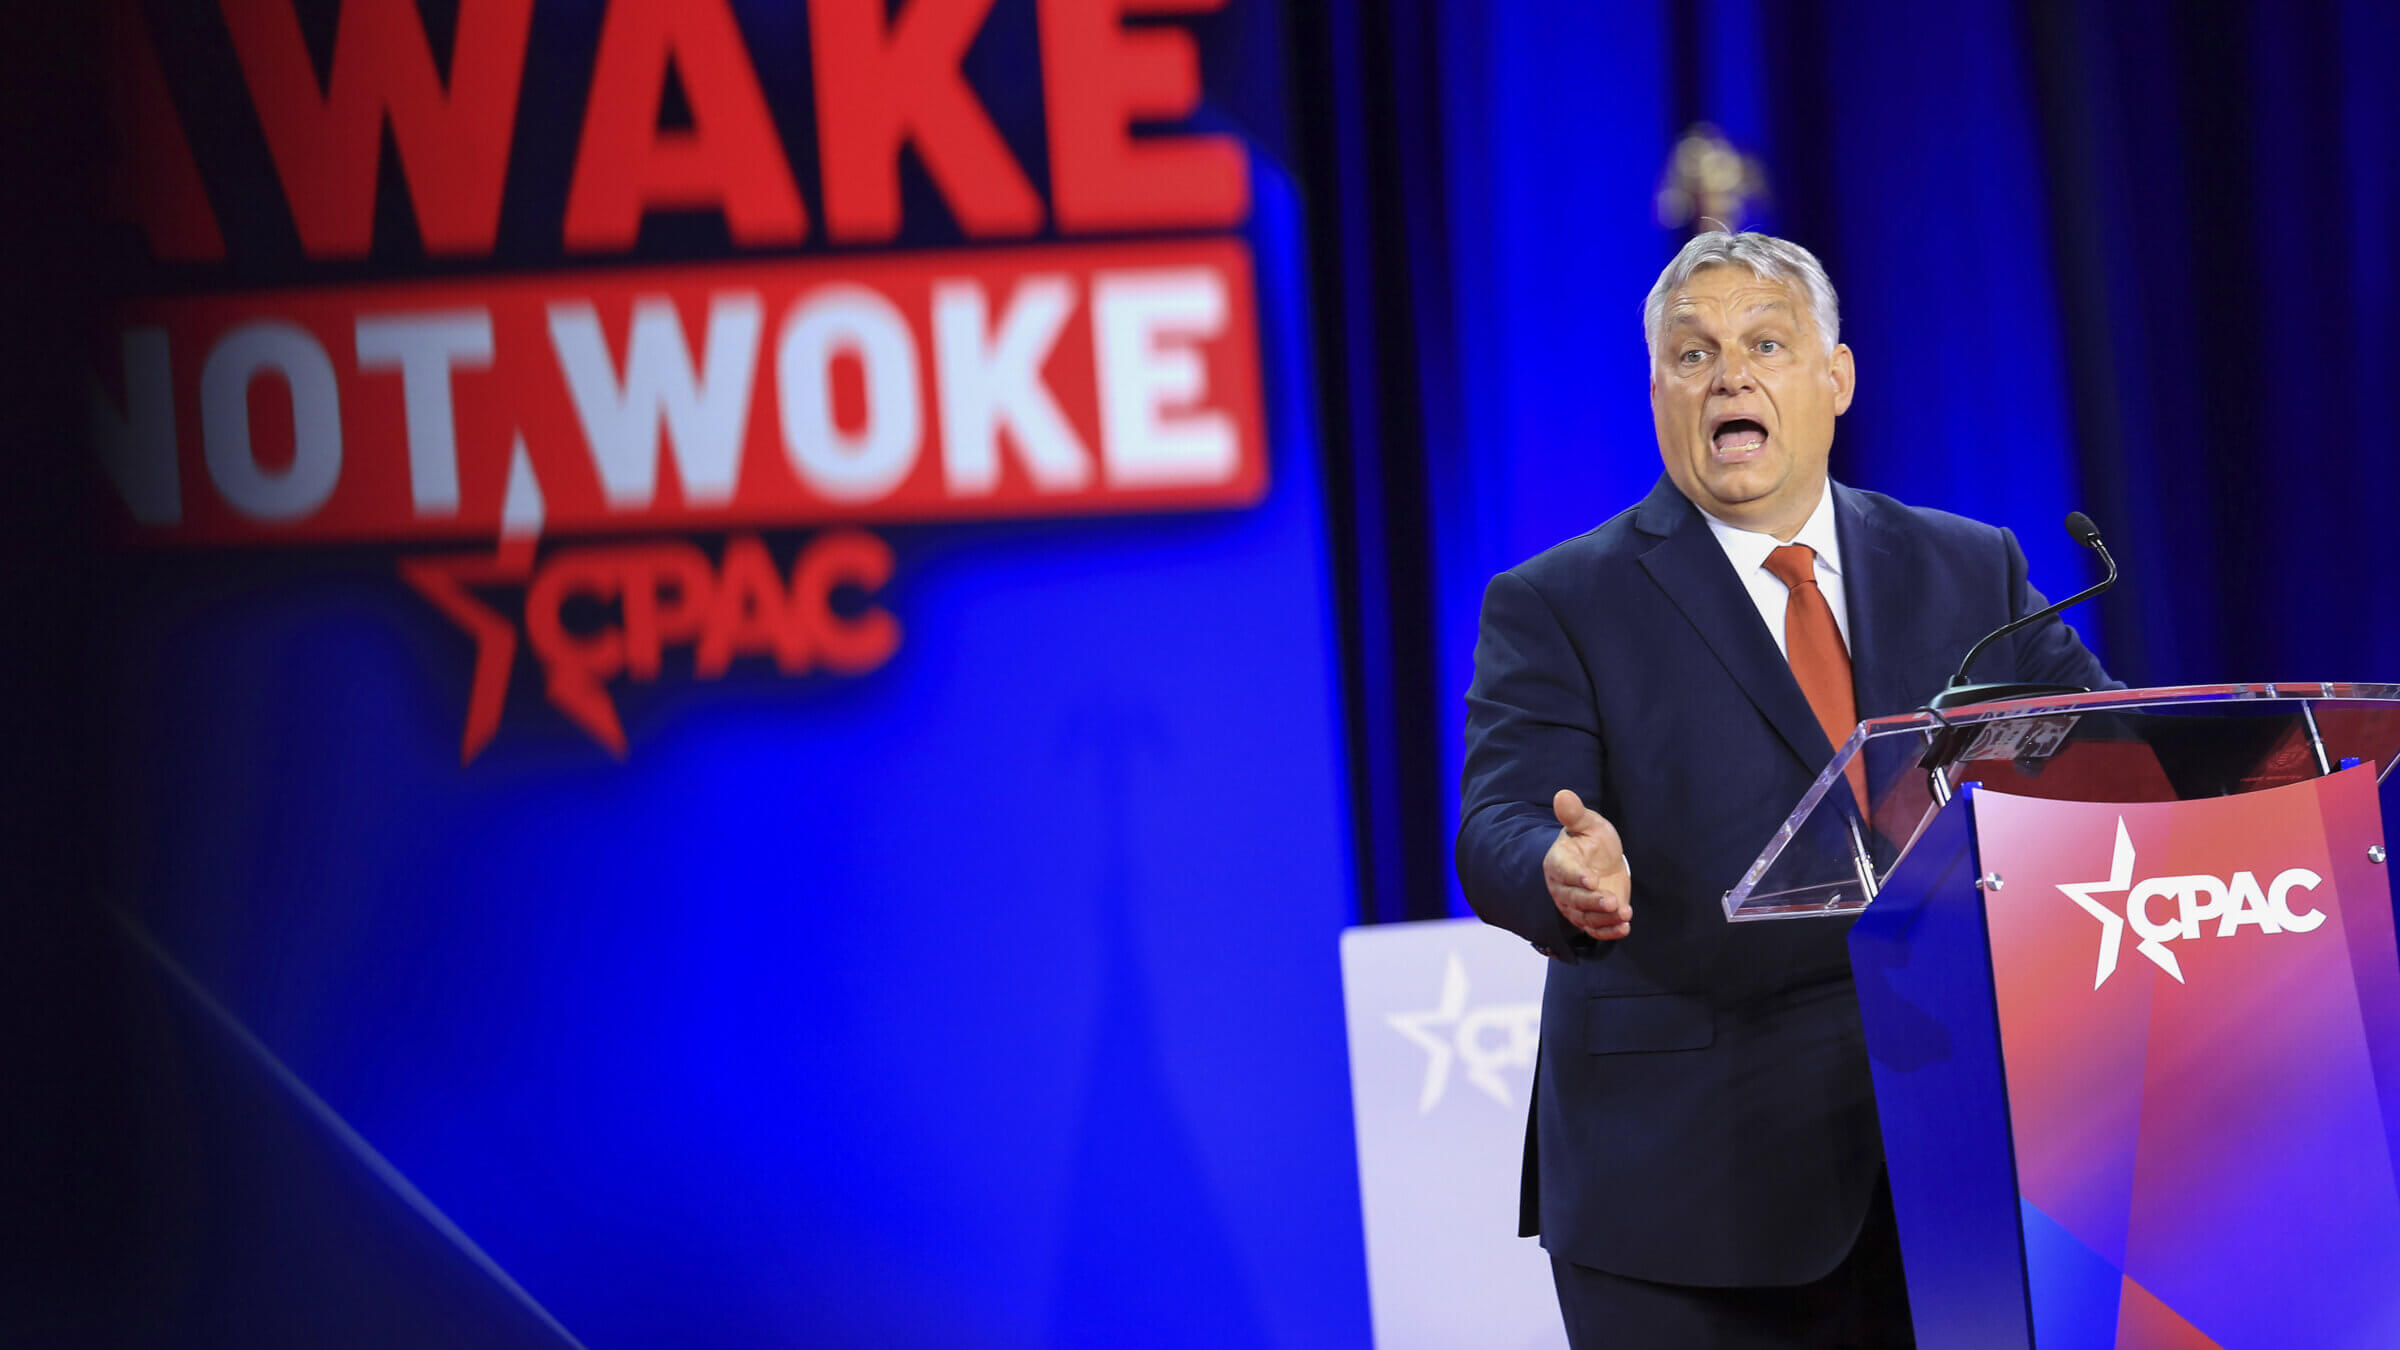 Viktor Orban, Hungary's prime minister, speaks during the Conservative Political Action Conference (CPAC) in Dallas, on Aug. 4, 2022.